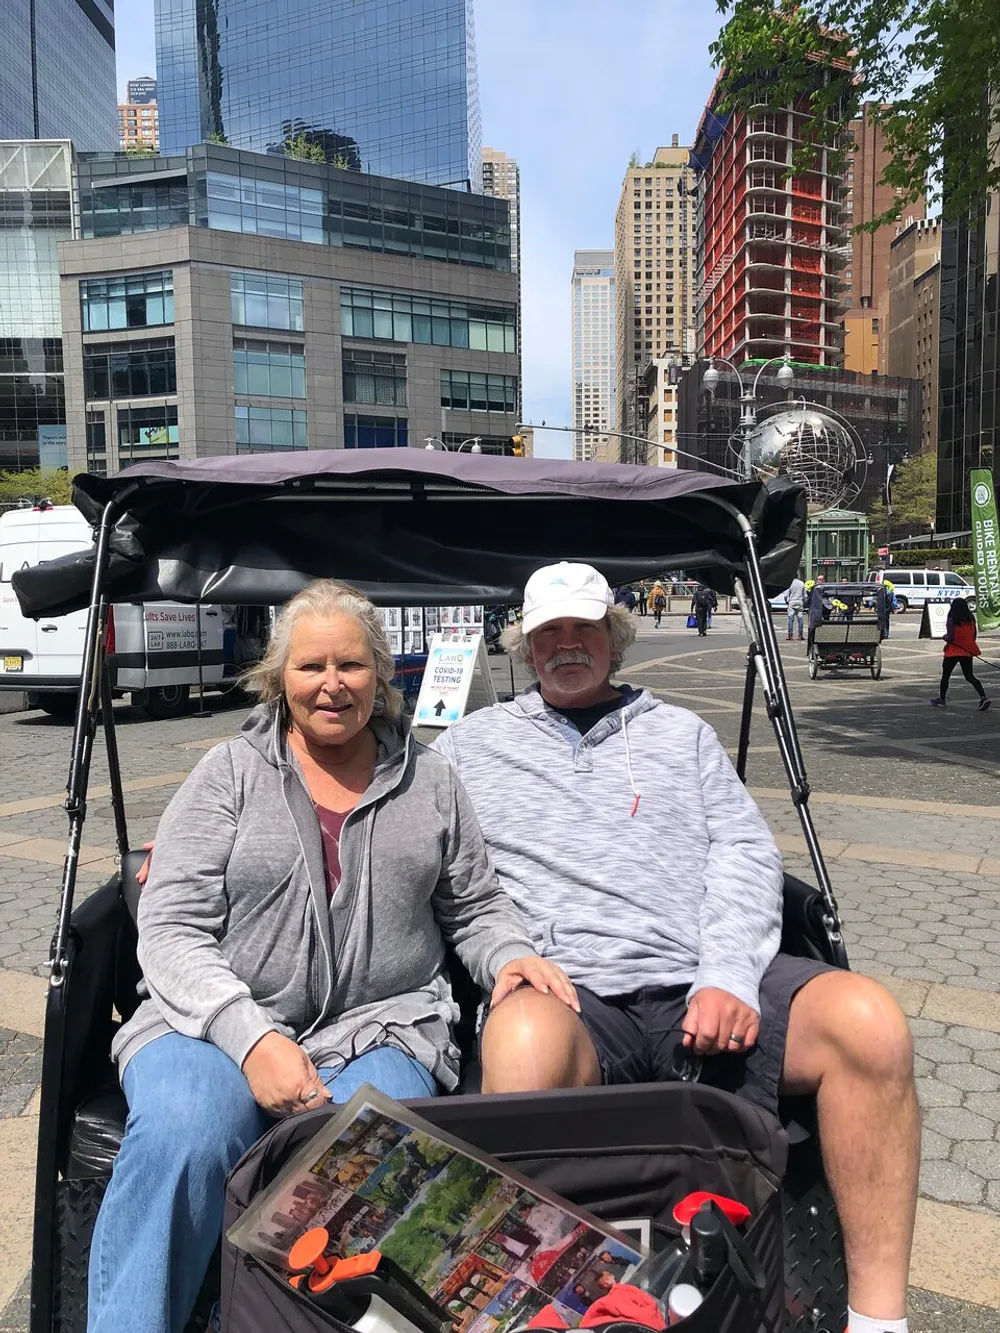 A smiling couple is sitting in a pedicab in an urban setting featuring modern buildings and a globe sculpture in the background